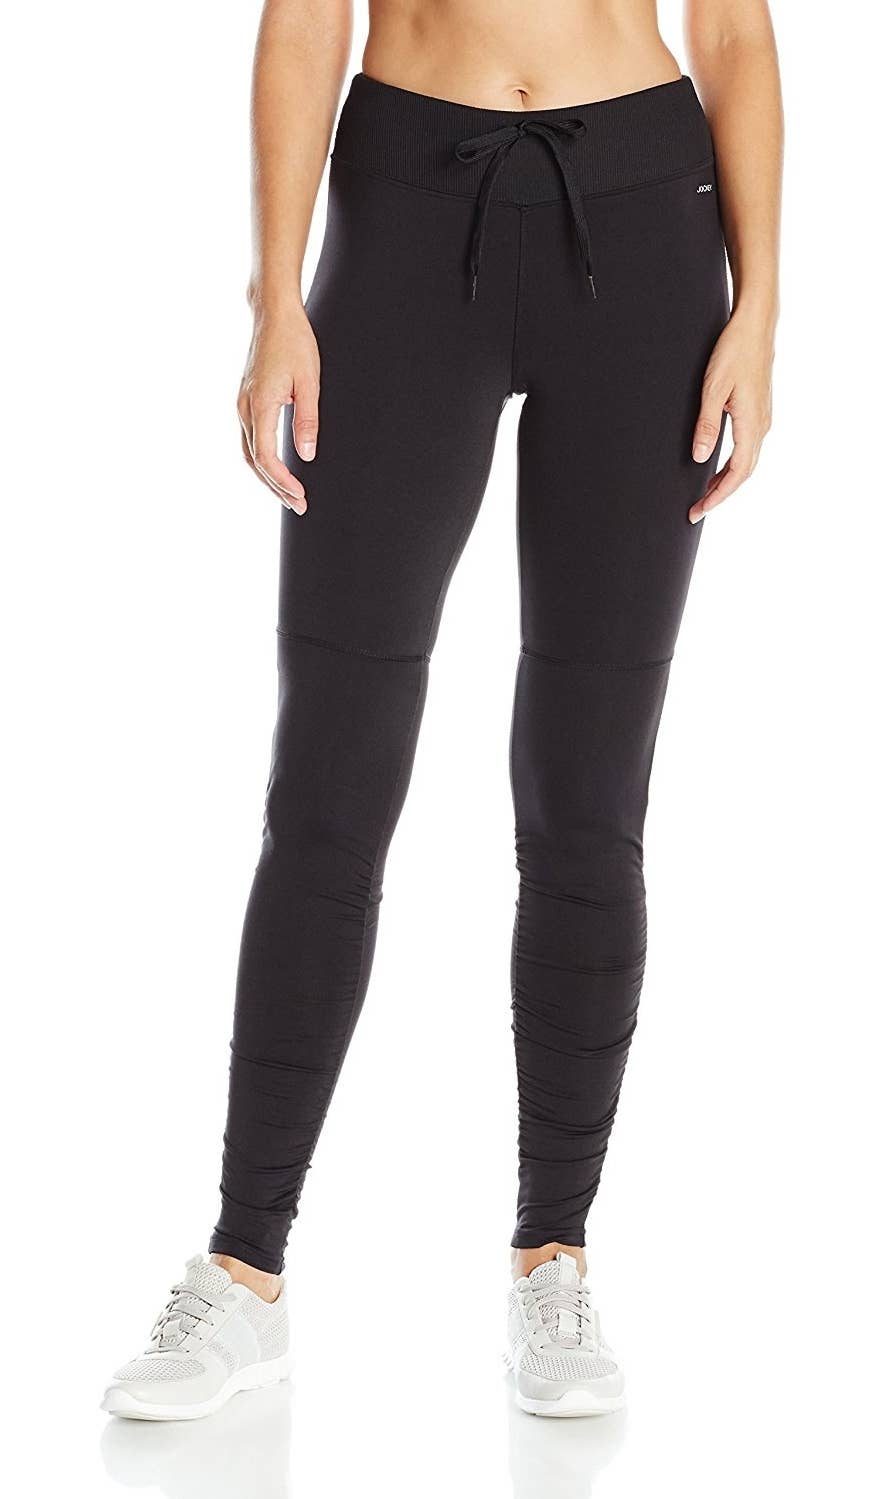 21 Of The Best Pairs Of Leggings You Can Get On